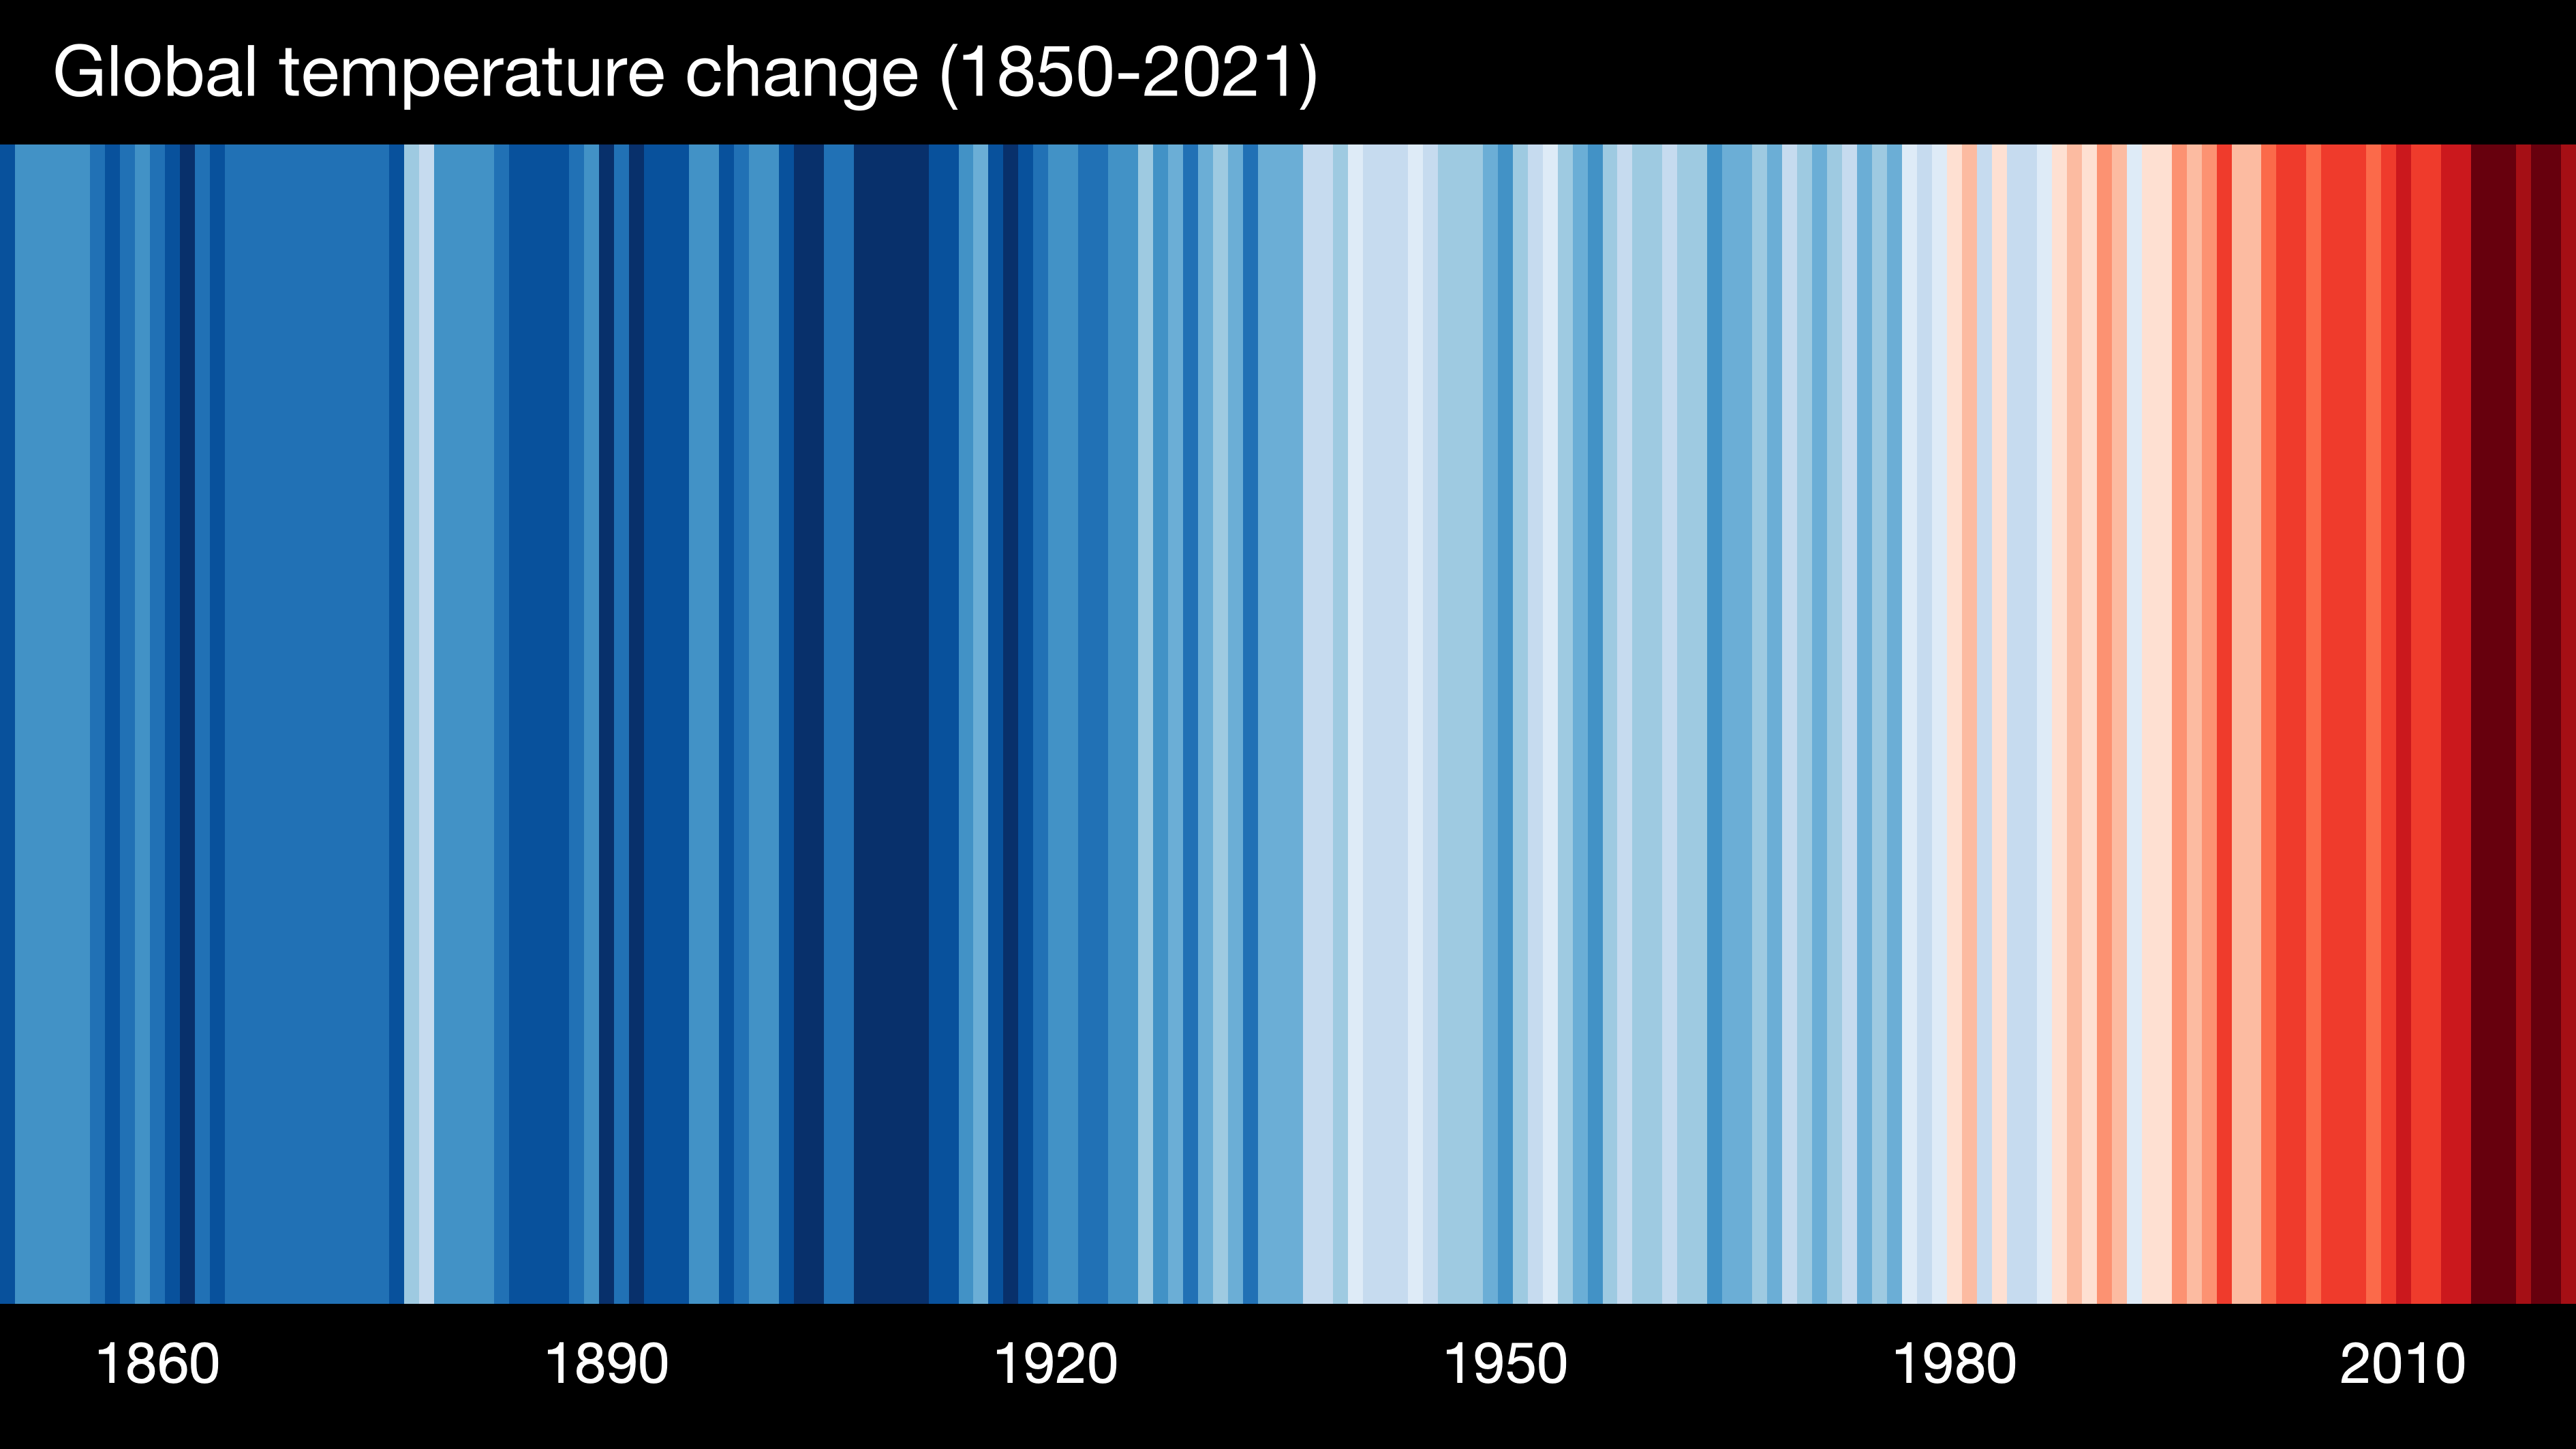 The Show your stripes visualisation, with blue lines representing colder than average years and red lines the warmer than average years. The more recent years (on the right of the chart) are all coloured red and deep red